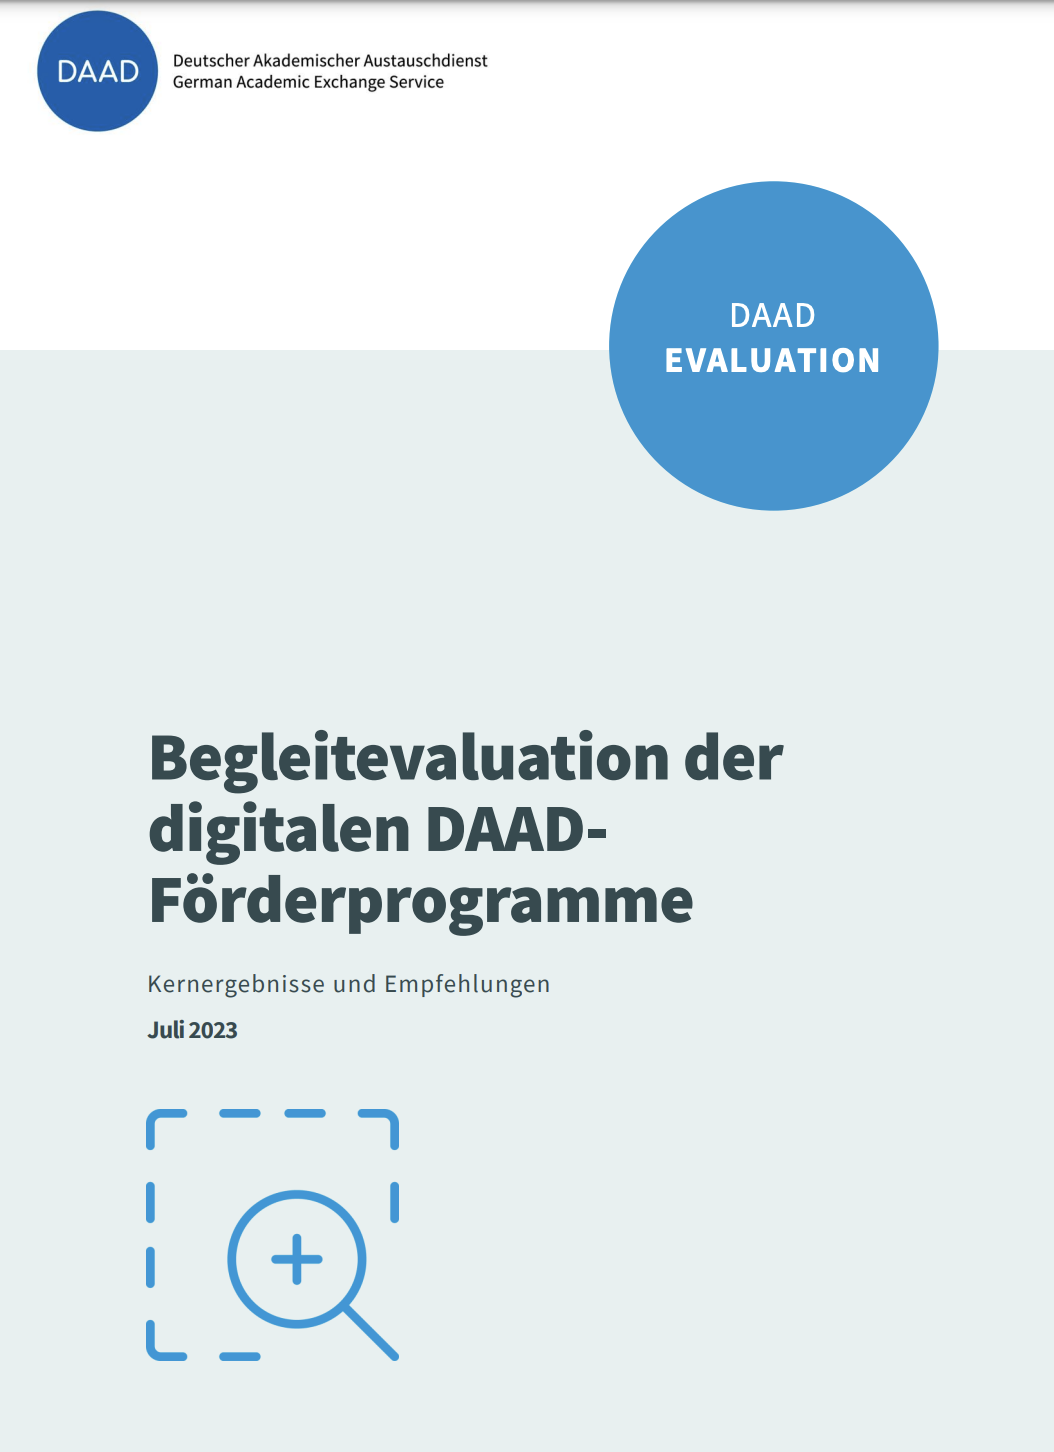 Evaluation of the digital DAAD funding programmes